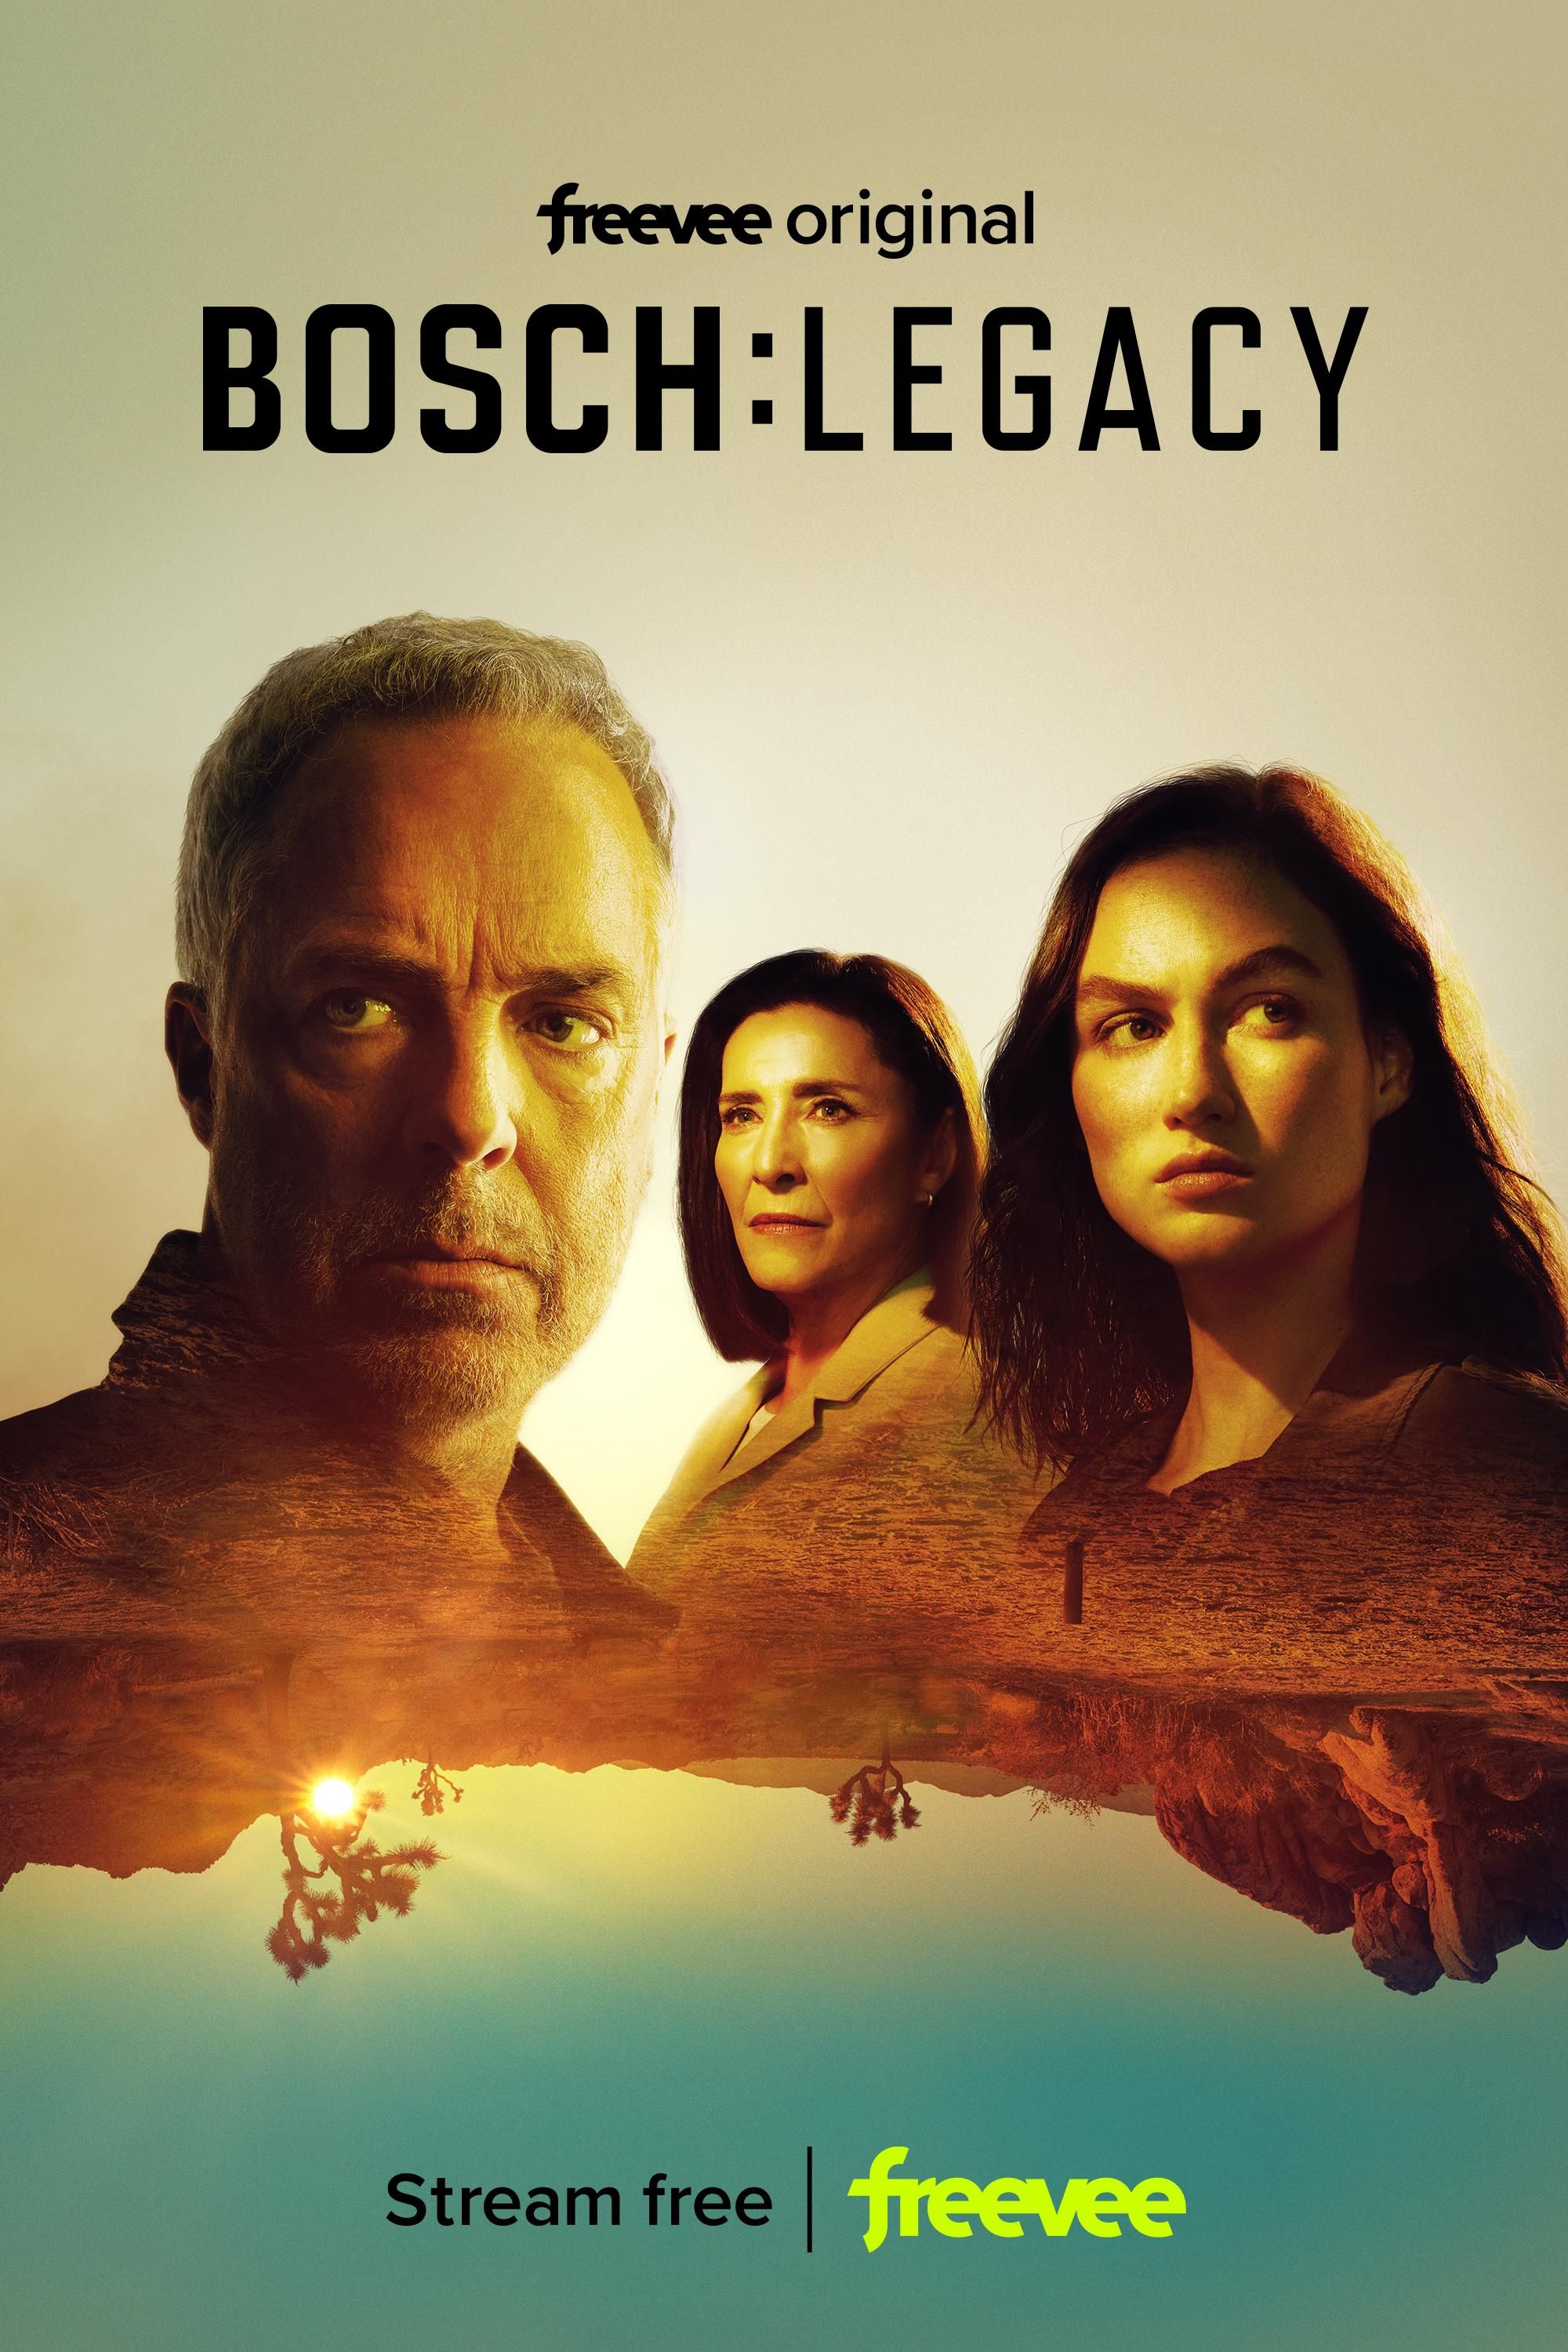 How Bosch: Legacy Turns Los Angeles Into a Character